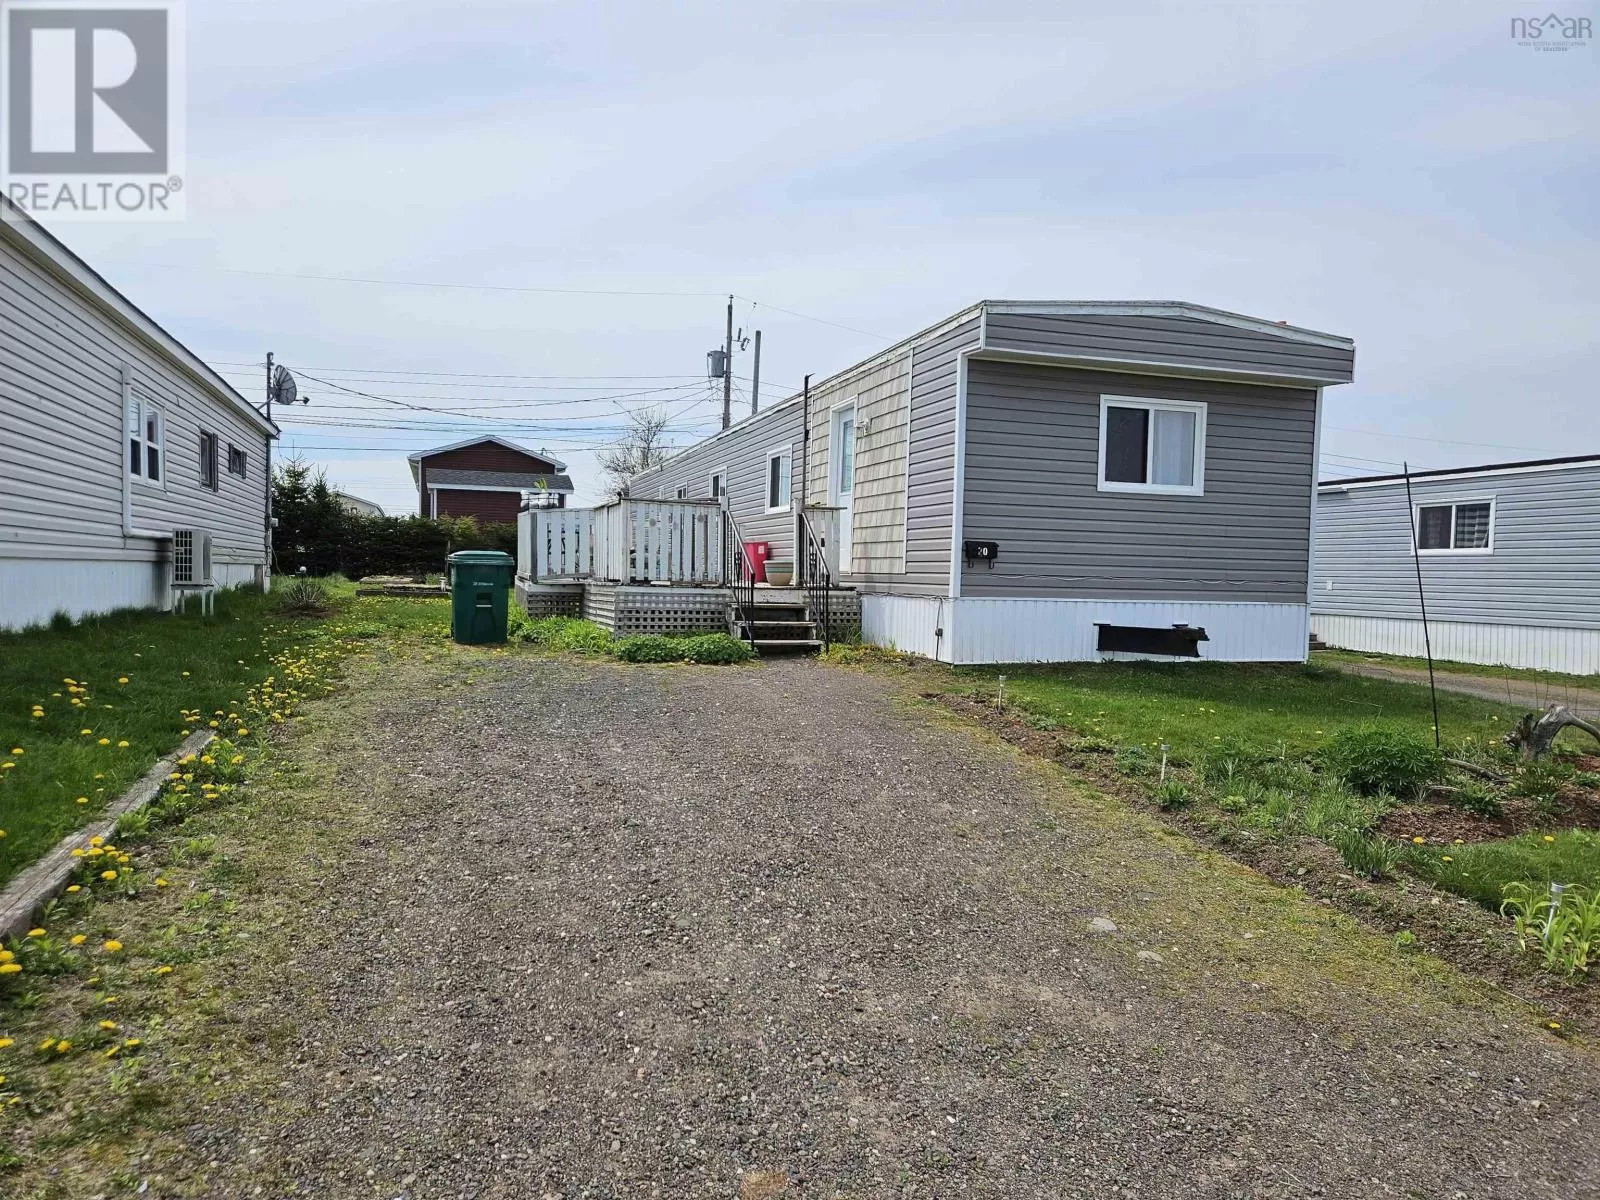 Mobile Home for rent: 20 Andy's Avenue, Bible Hill, Nova Scotia B2N 2X1